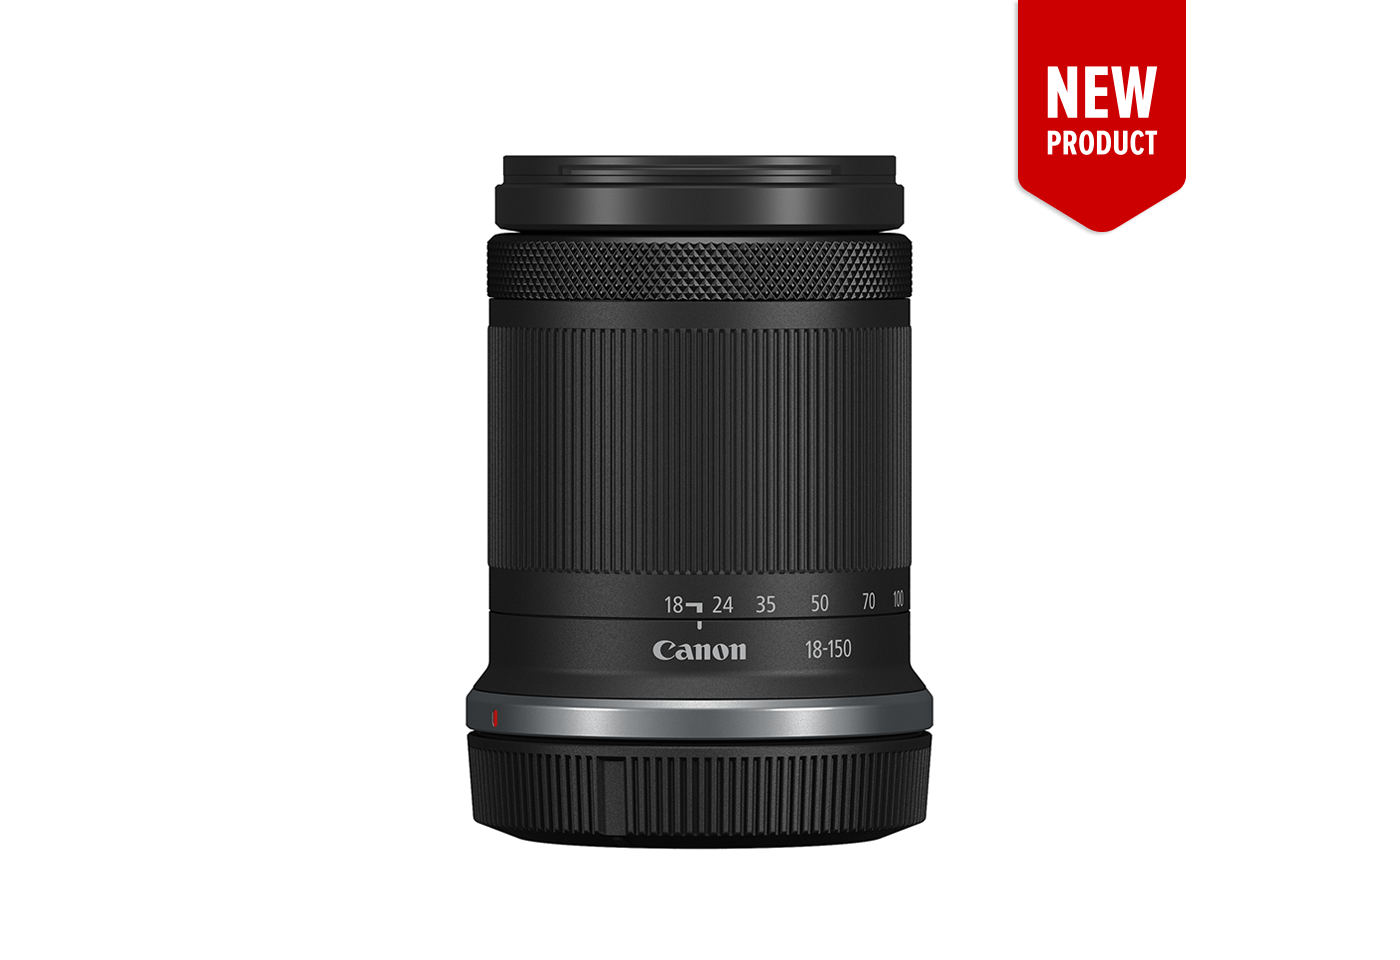 Product image of the new RF-S 18-150mm f/3.5-6.3 IS STM standard zoom lens